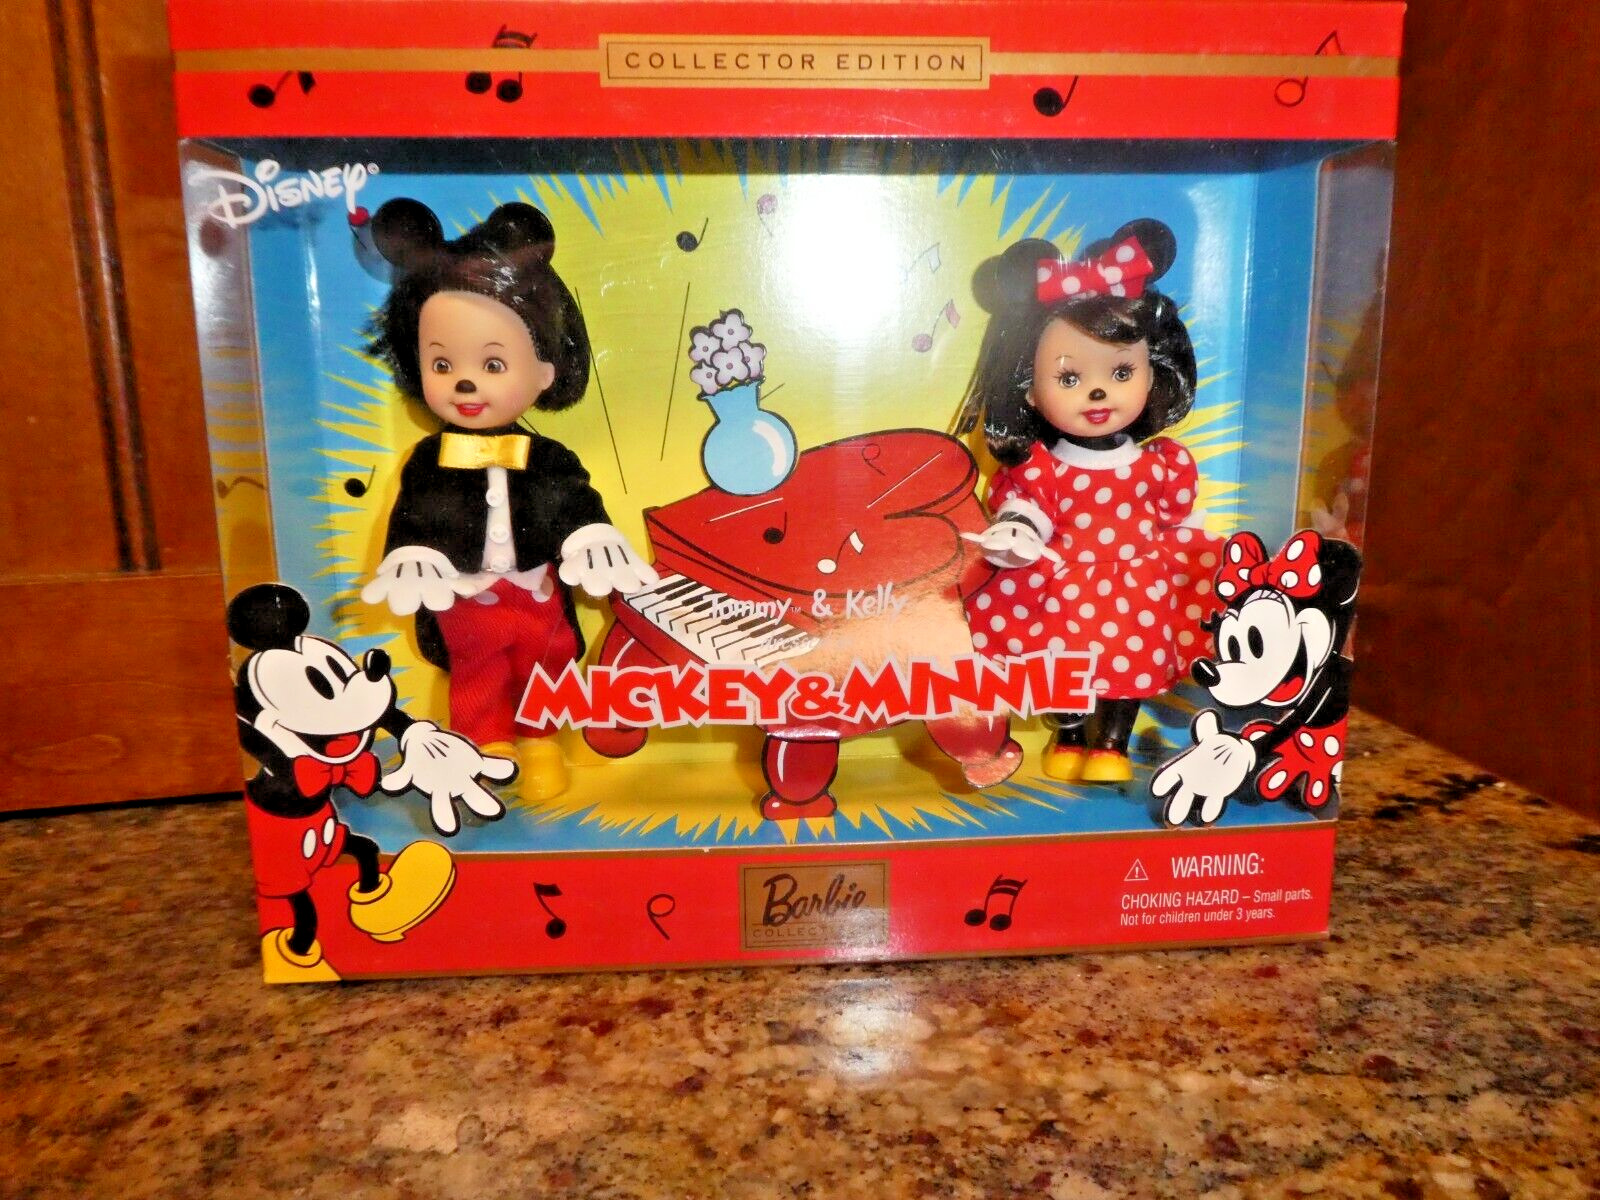 2002 KELLY & TOMMY AS MICKEY & MINNIE MOUSE GIFTSET  MINT HIGHLY DETAILED NRFB